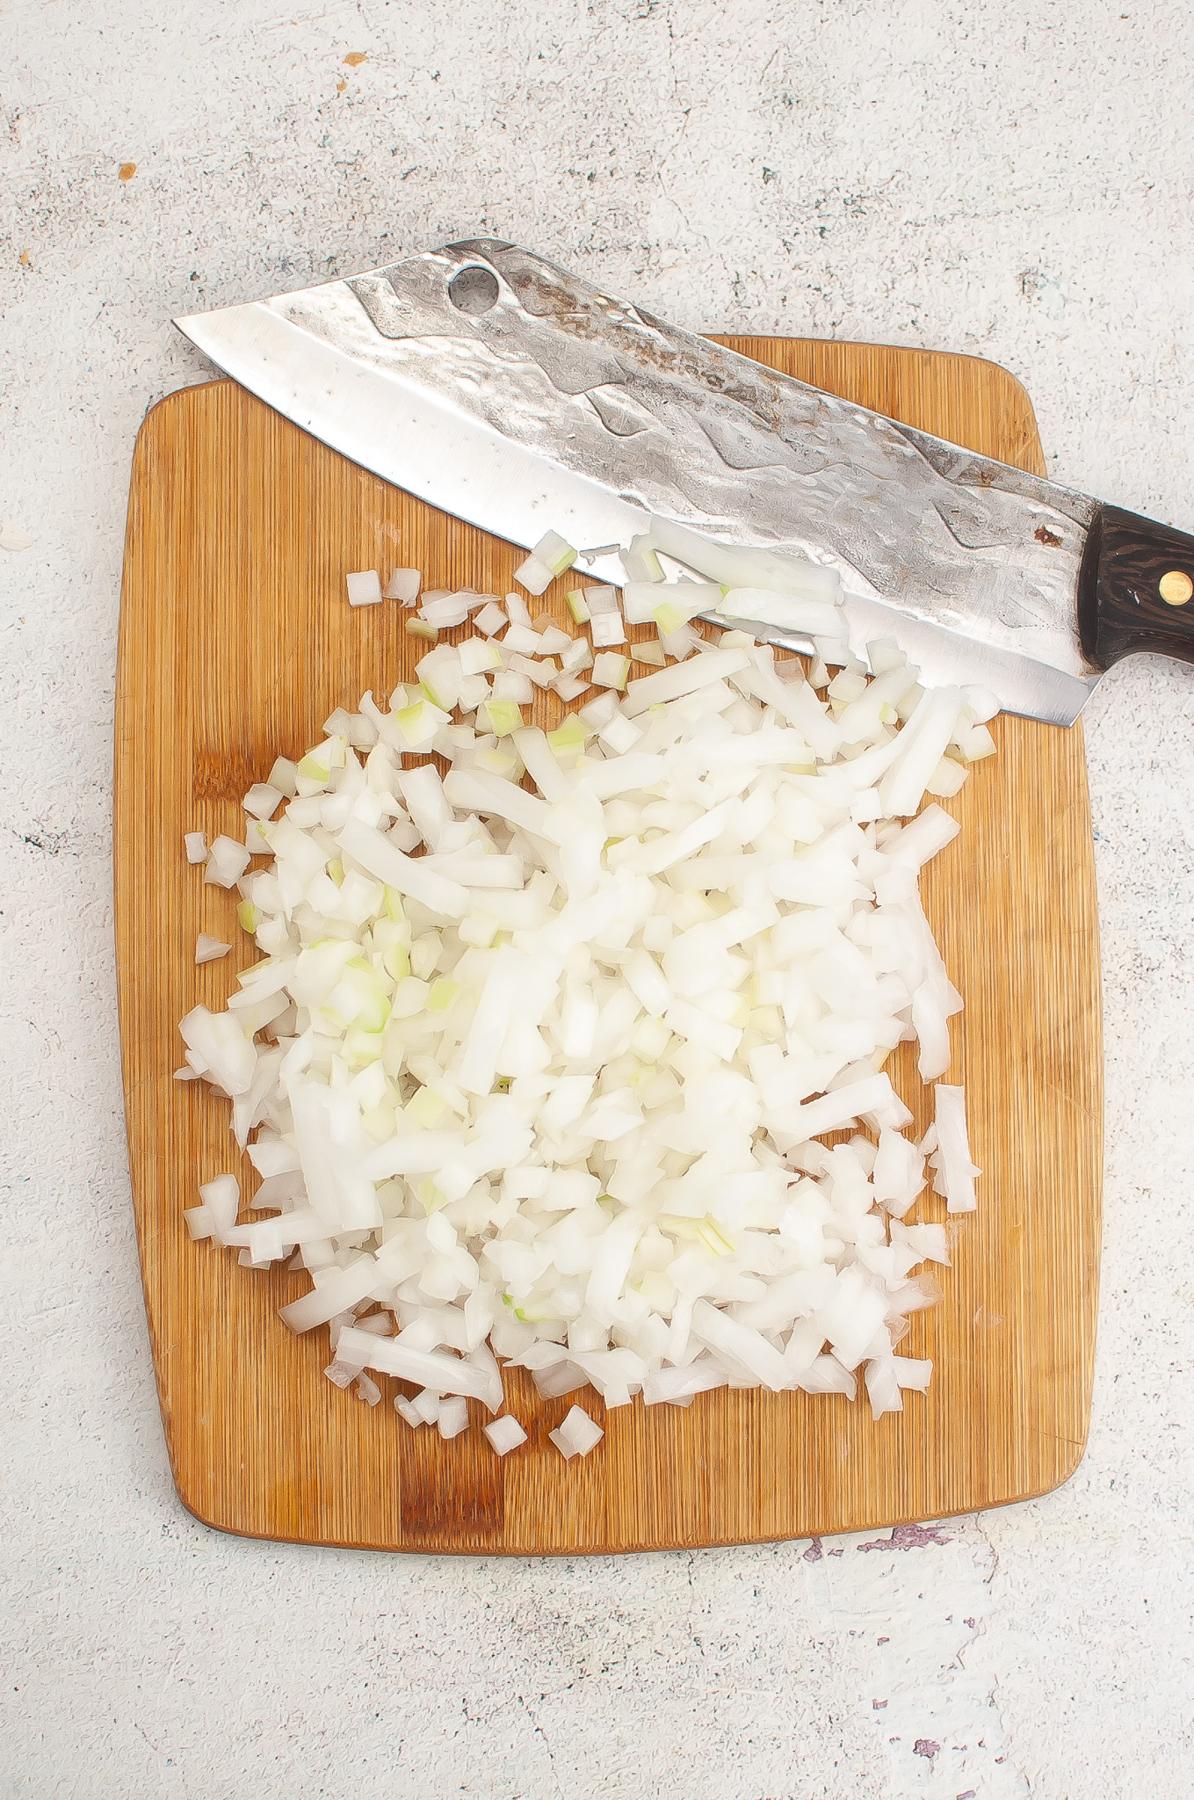 Onions diced small on a cutting board.